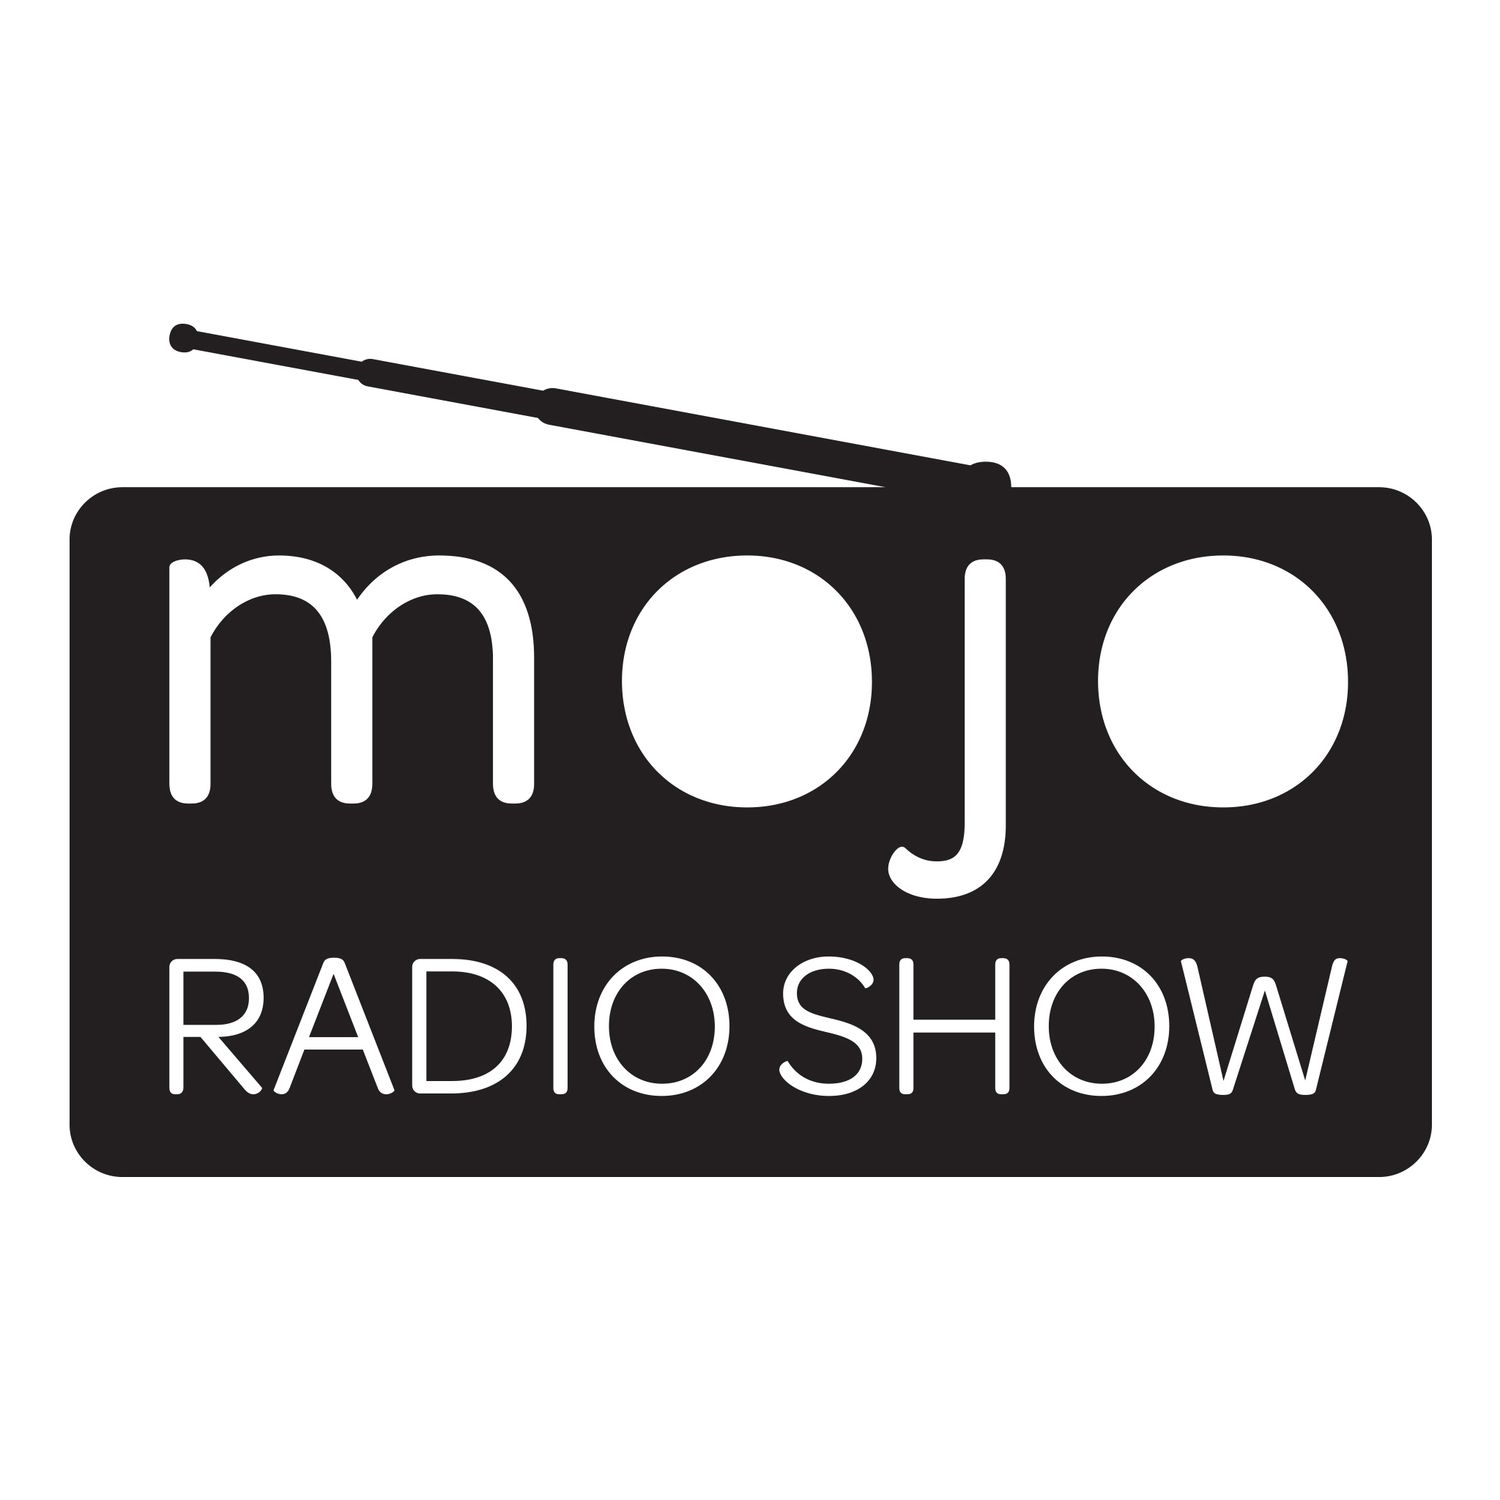 The Mojo Radio Show EP 235: Ultimate Success In Your Life, But At What Cost? Yu Dan Shi